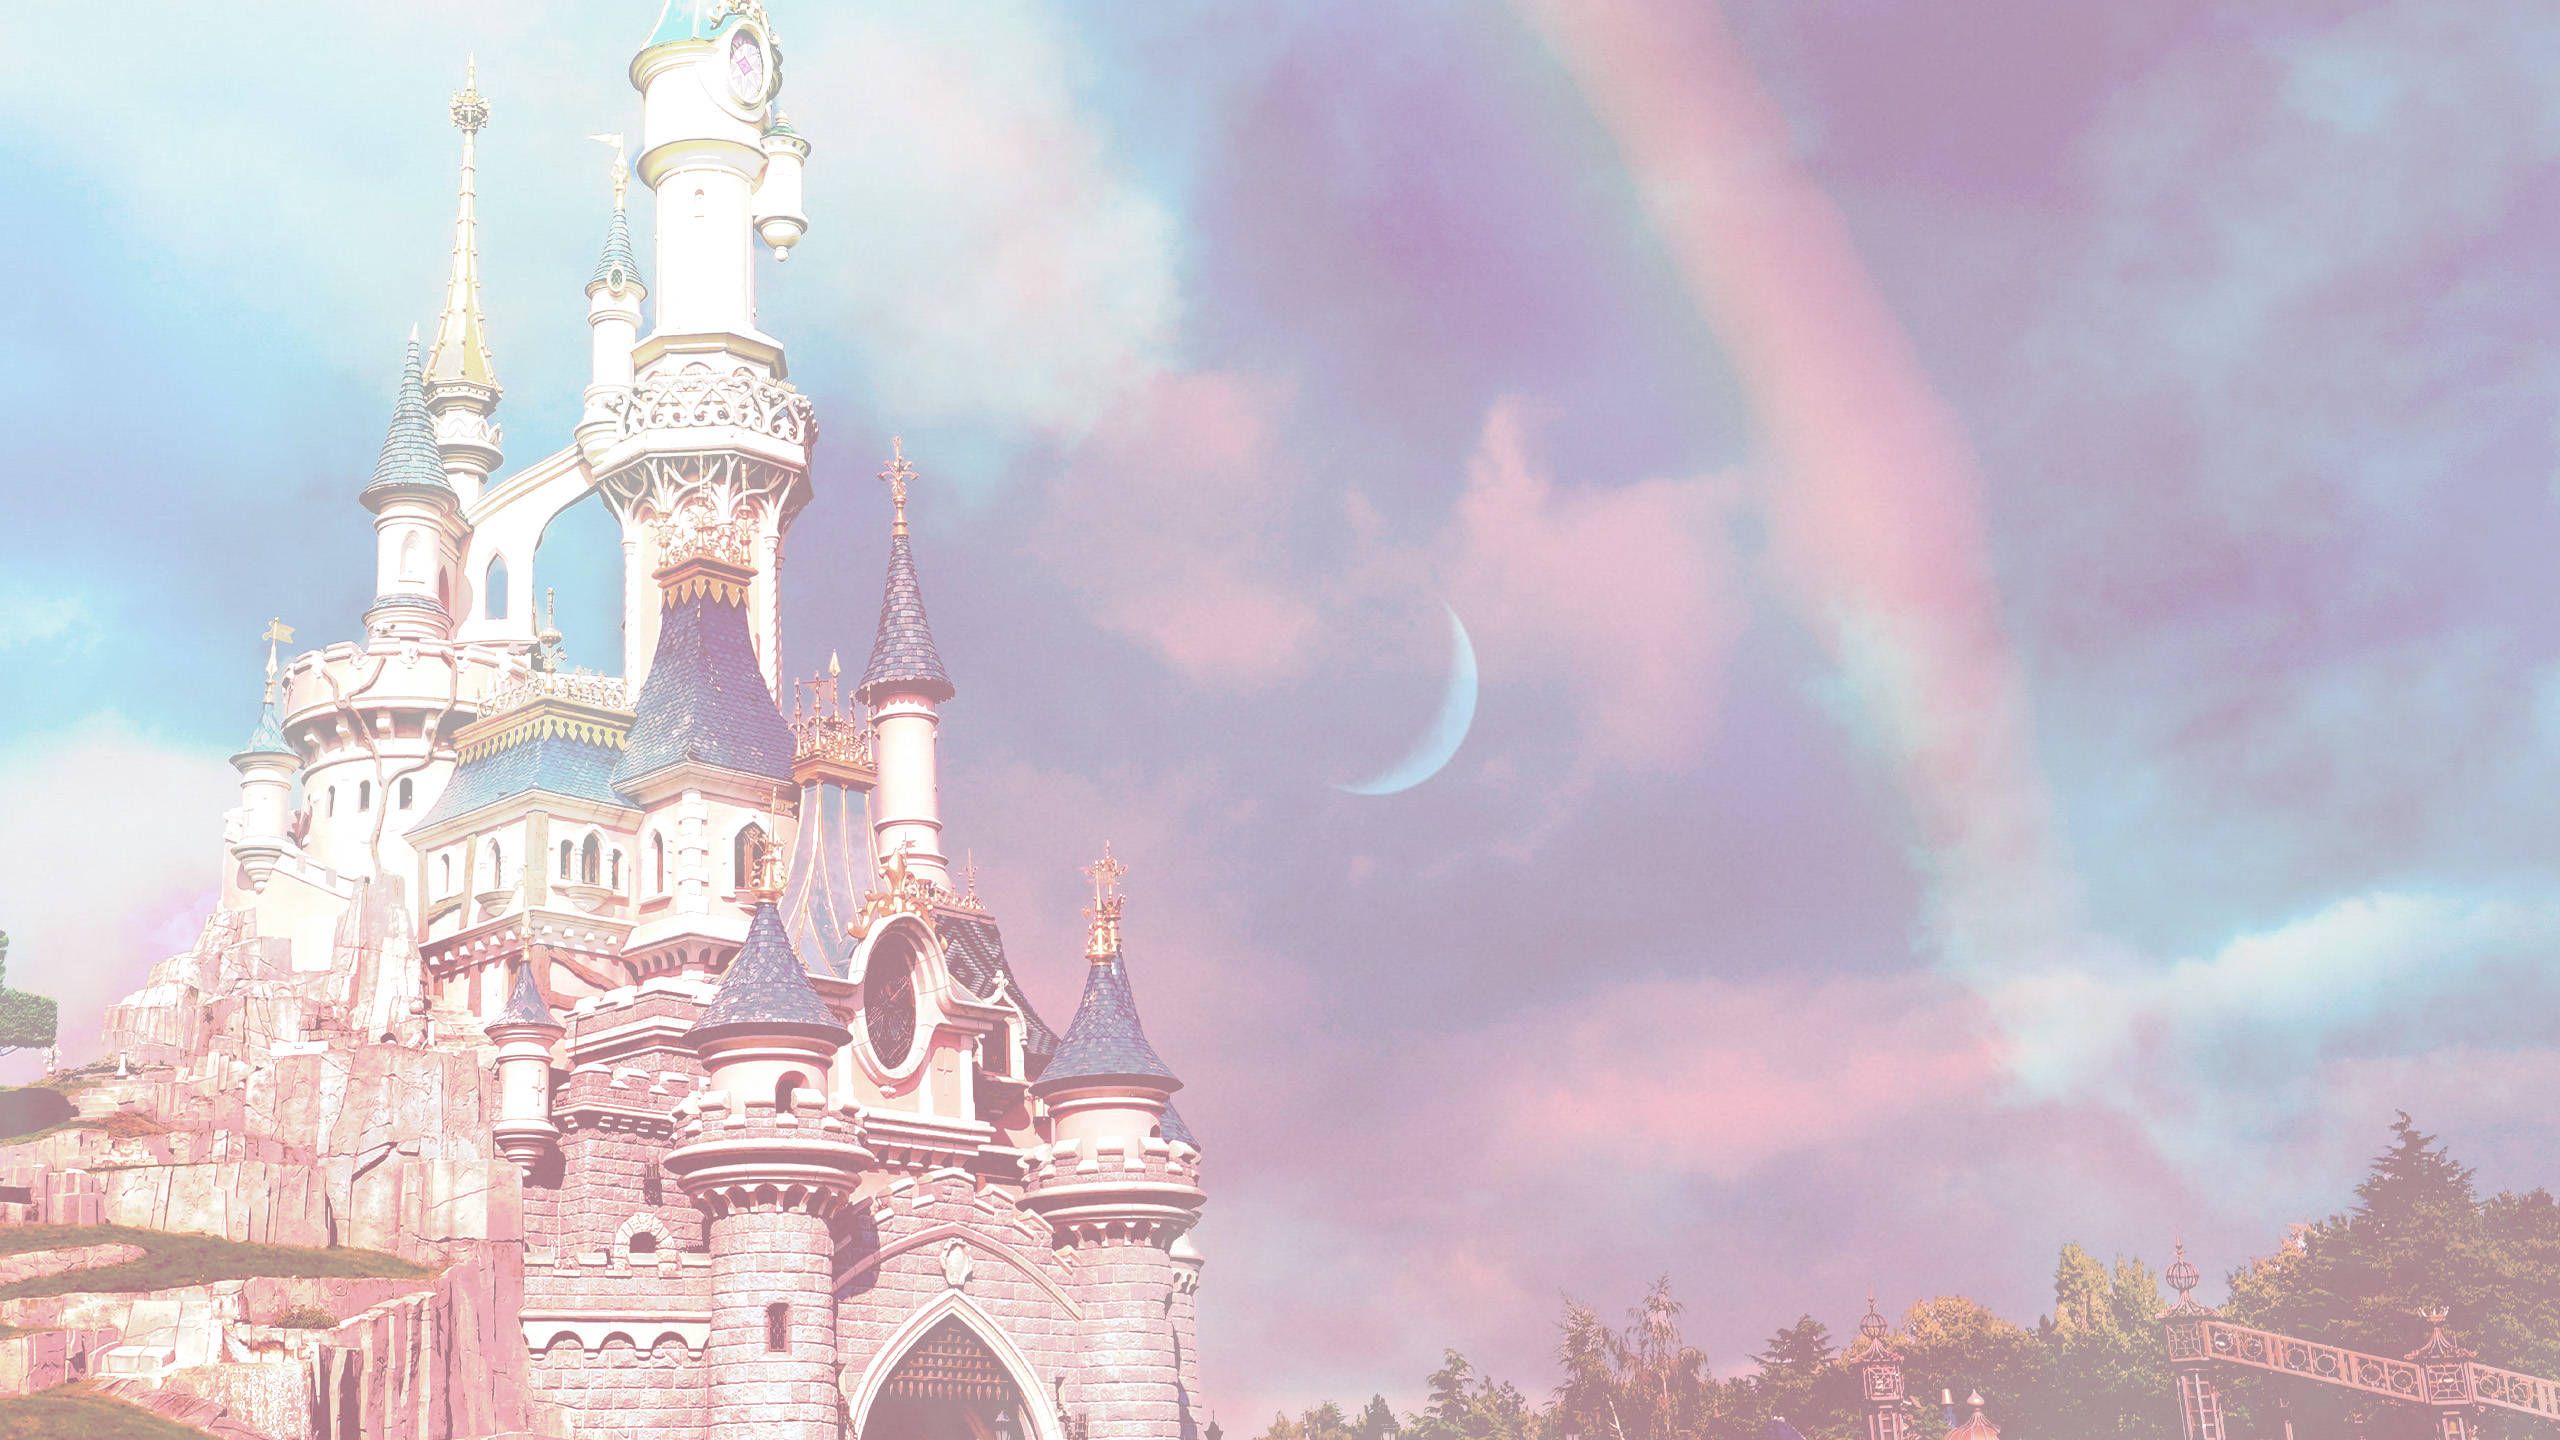 A castle with rainbow in the sky - Disneyland